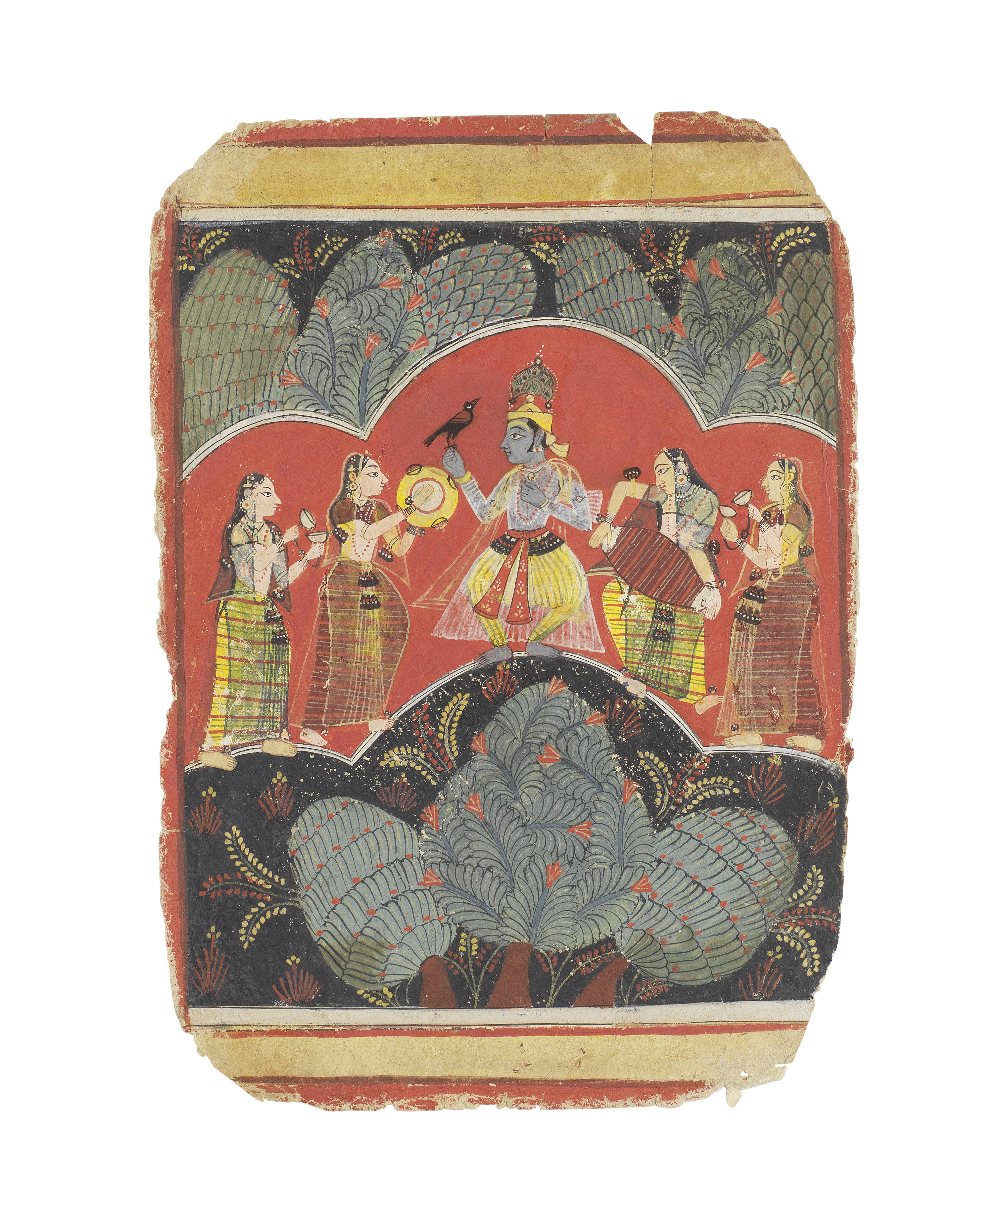 Vasant ragini: Krishna, or a prince in the guise of Krishna, dancing in a forest grove with fema...